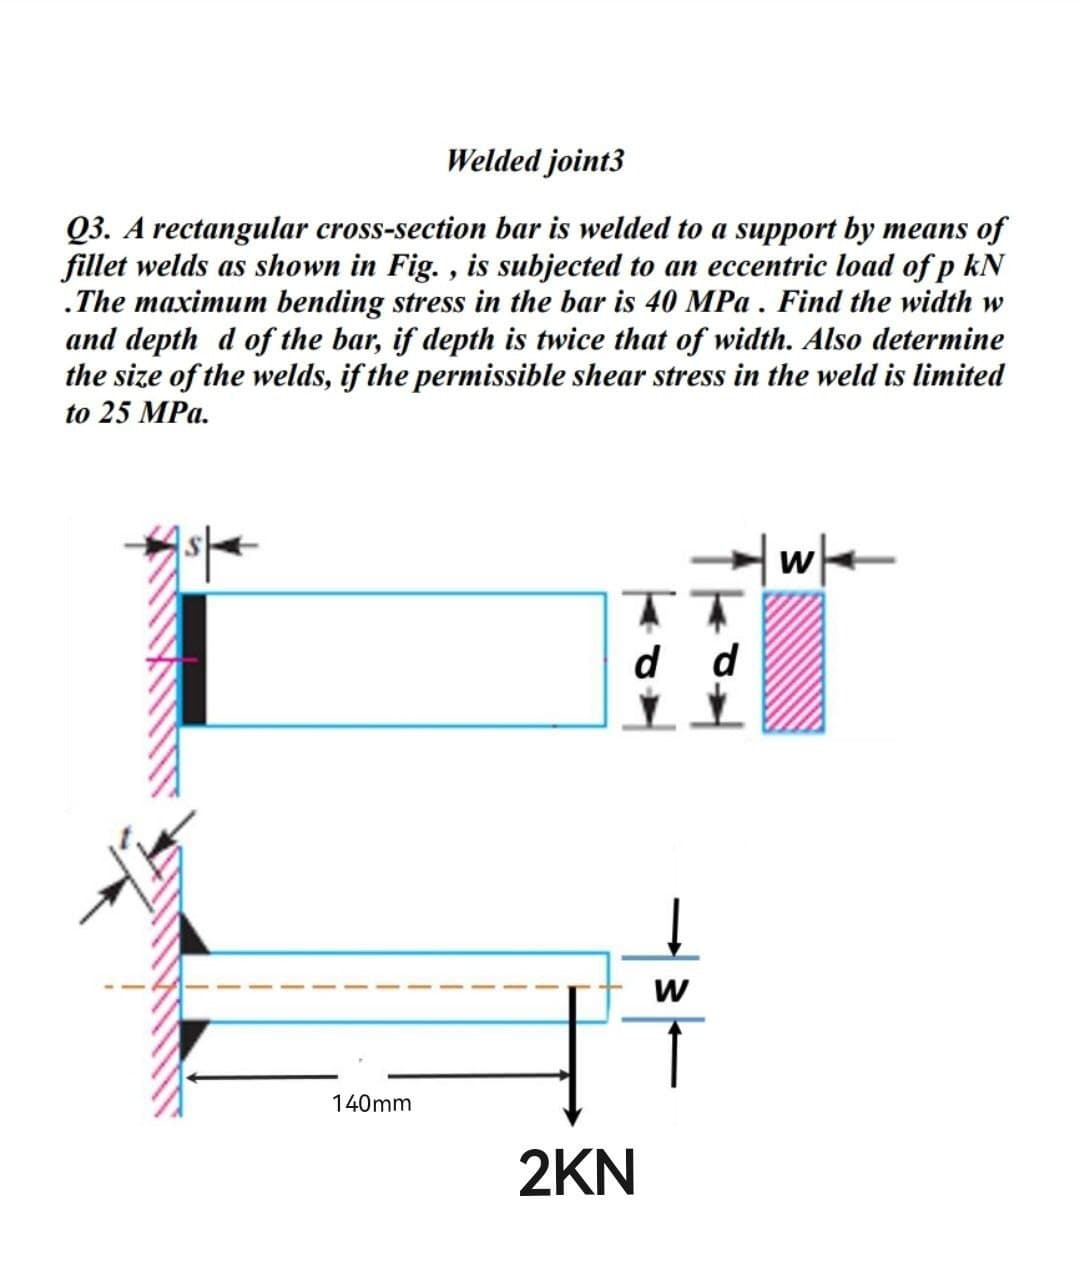 Welded joint3
Q3. A rectangular cross-section bar is welded to a support by means of
fillet welds as shown in Fig., is subjected to an eccentric load of p kN
.The maximum bending stress in the bar is 40 MPa. Find the width w
and depth d of the bar, if depth is twice that of width. Also determine
the size of the welds, if the permissible shear stress in the weld is limited
to 25 MPa.
140mm
d d
W
Ï
2KN
|wk
W